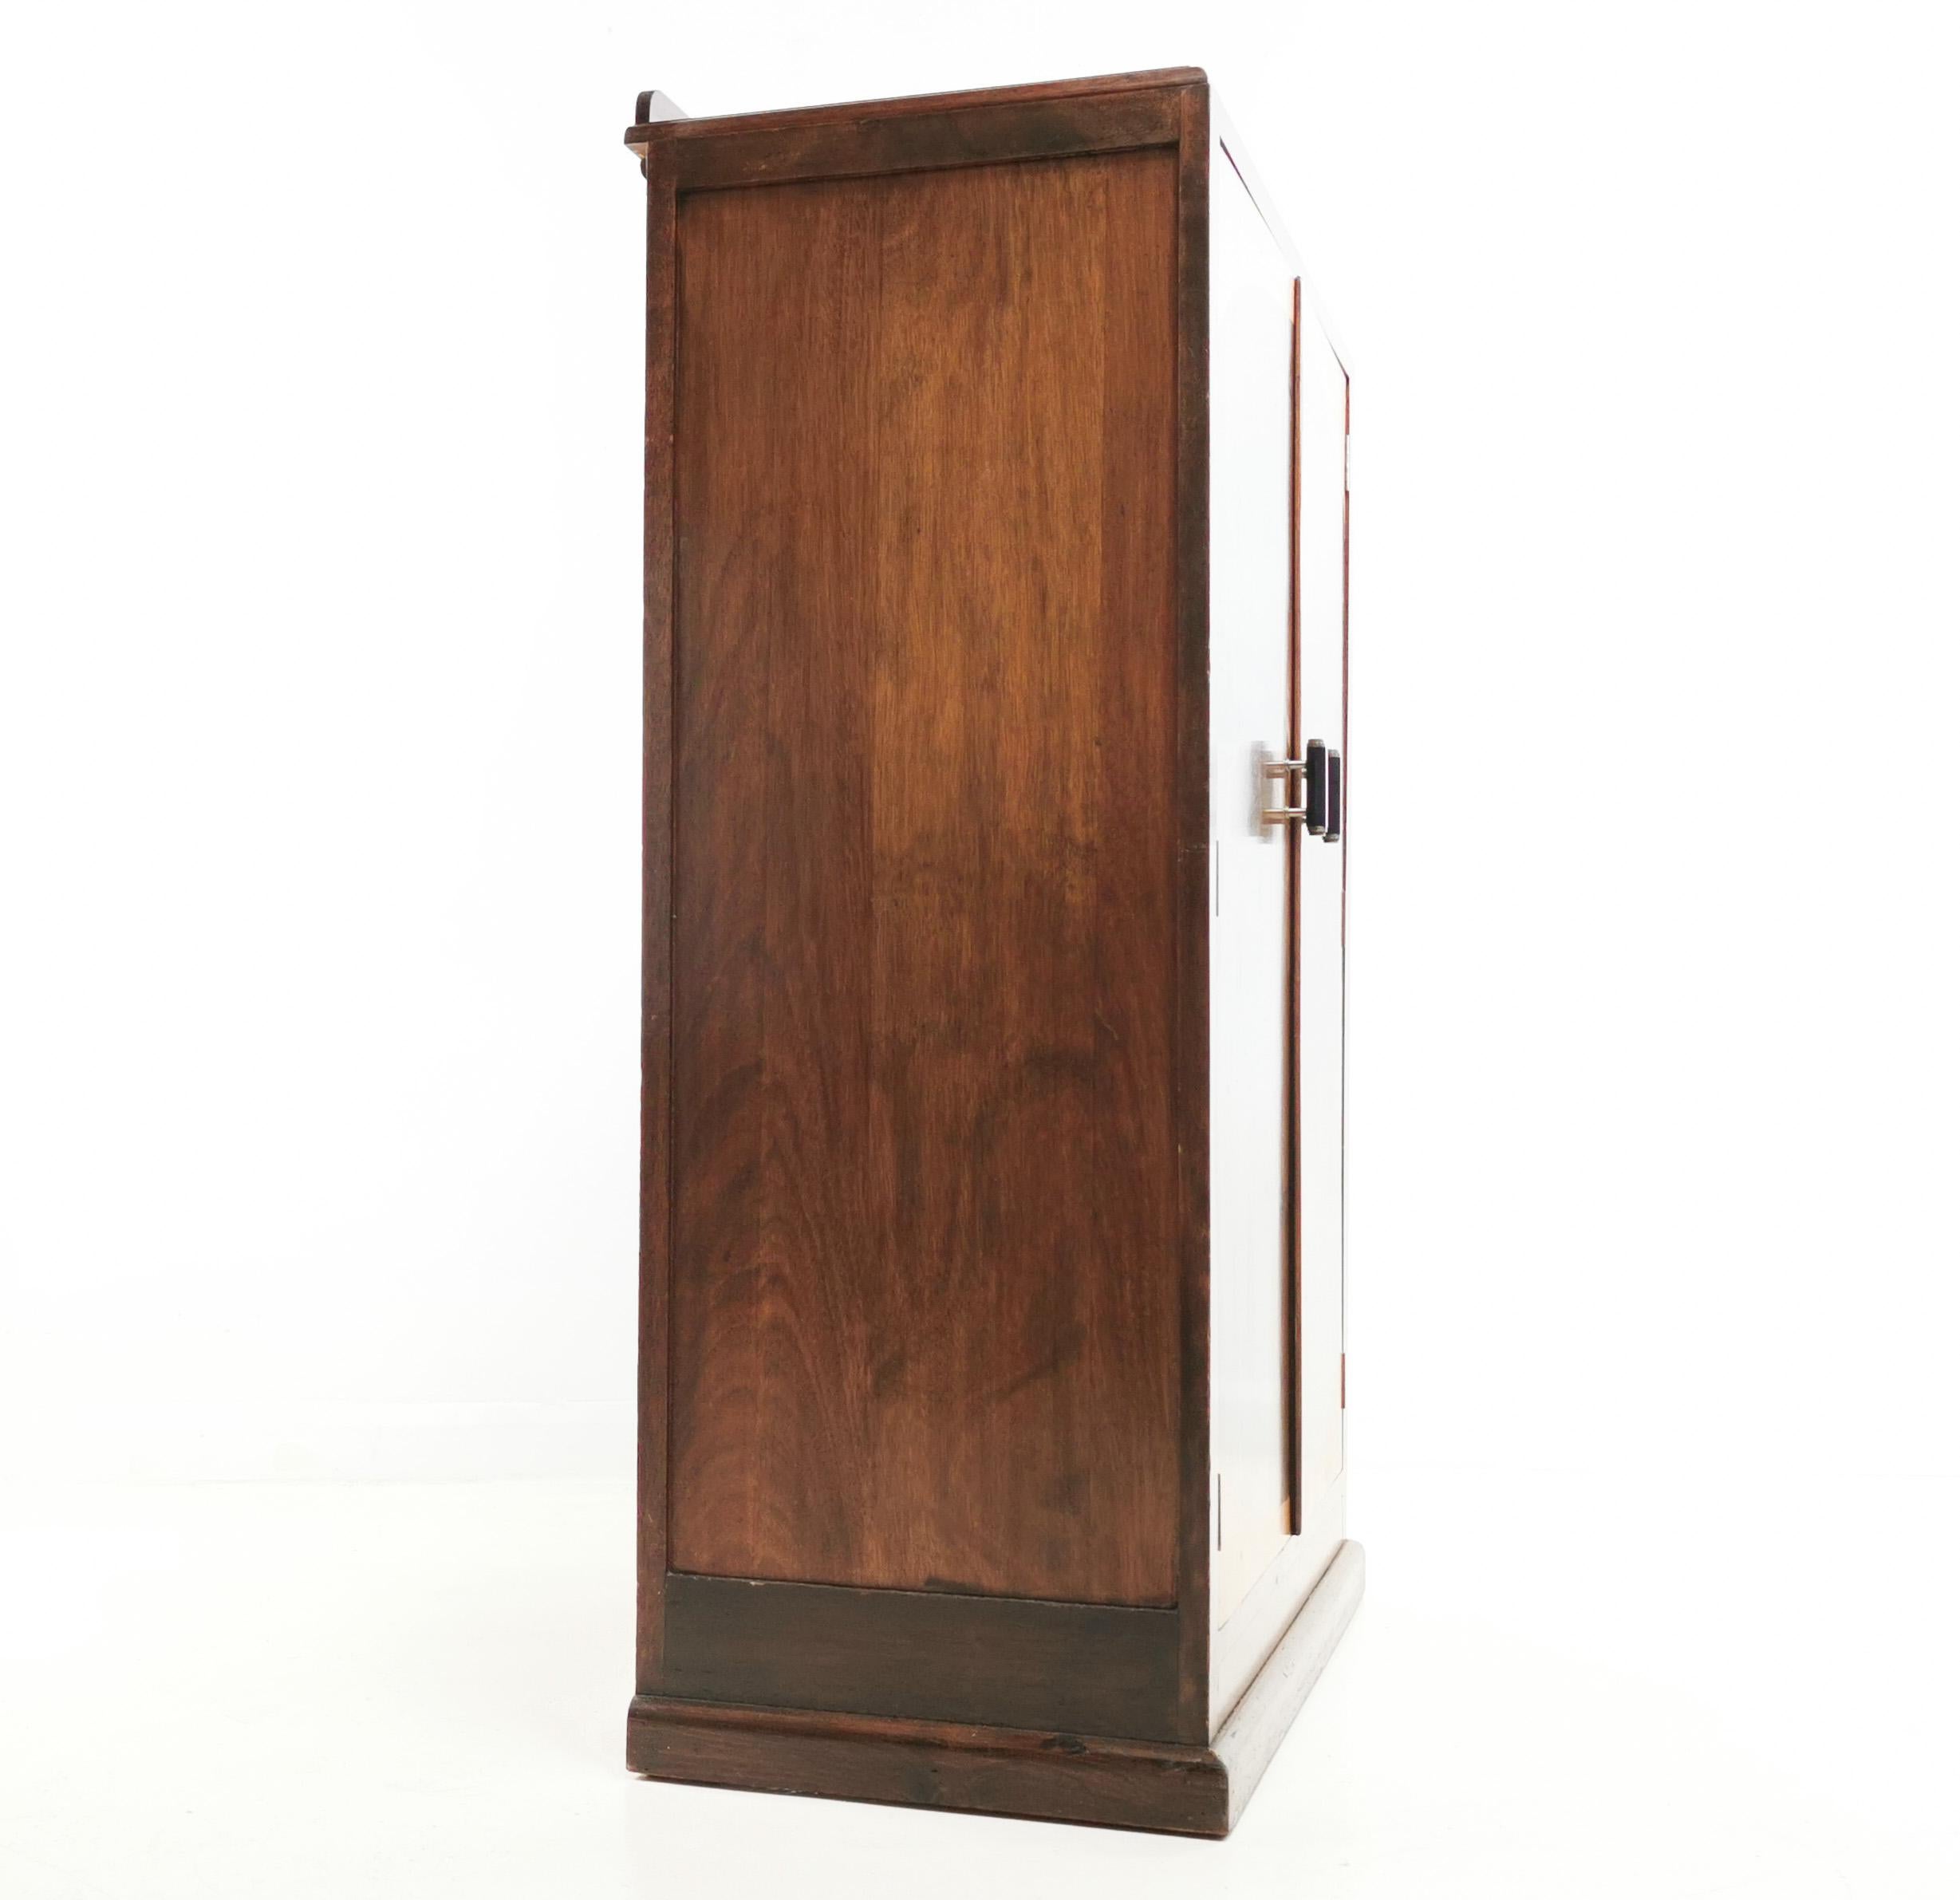 Art Deco Cupboard

1940s Art Deco cupboard in British walnut offered in very good condition with minimal signs of age and use.

Made by C.W.S Ltd, Cabinet makers of Radciffe, this versatile cupboard has a very strong art deco feel. It features a